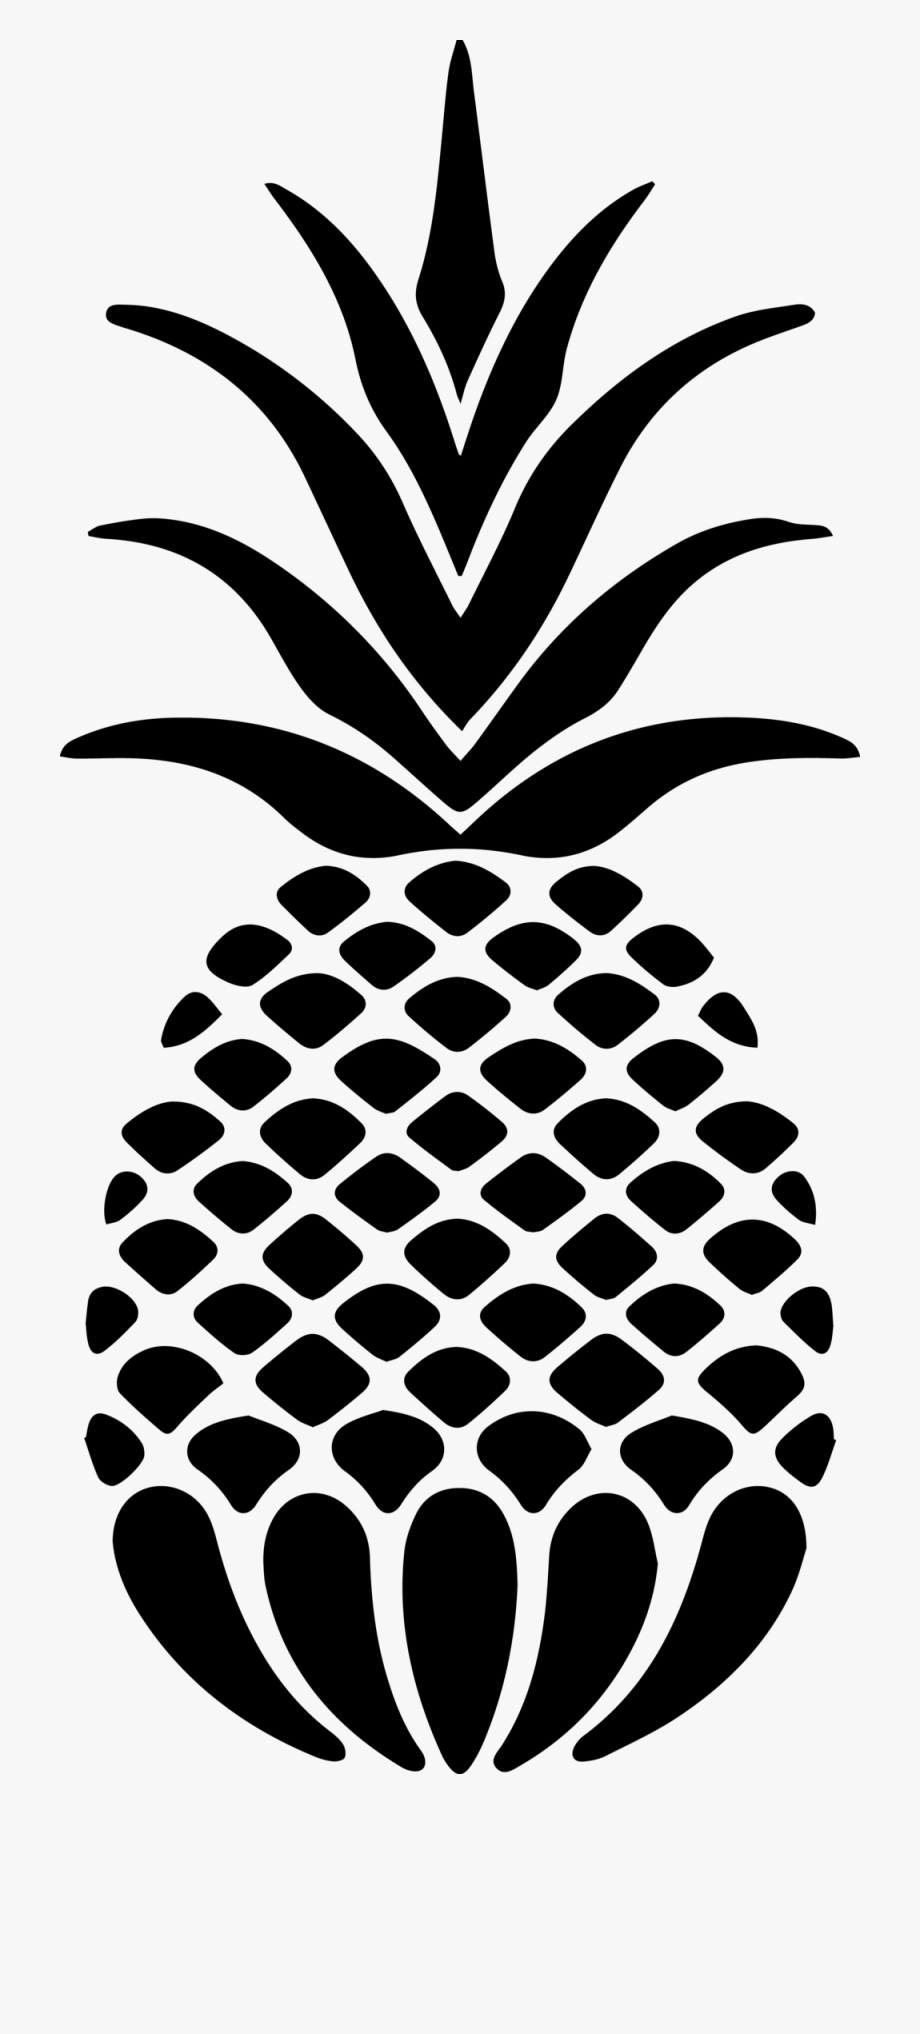 Download Pineapple clipart silhouette, Pineapple silhouette ...